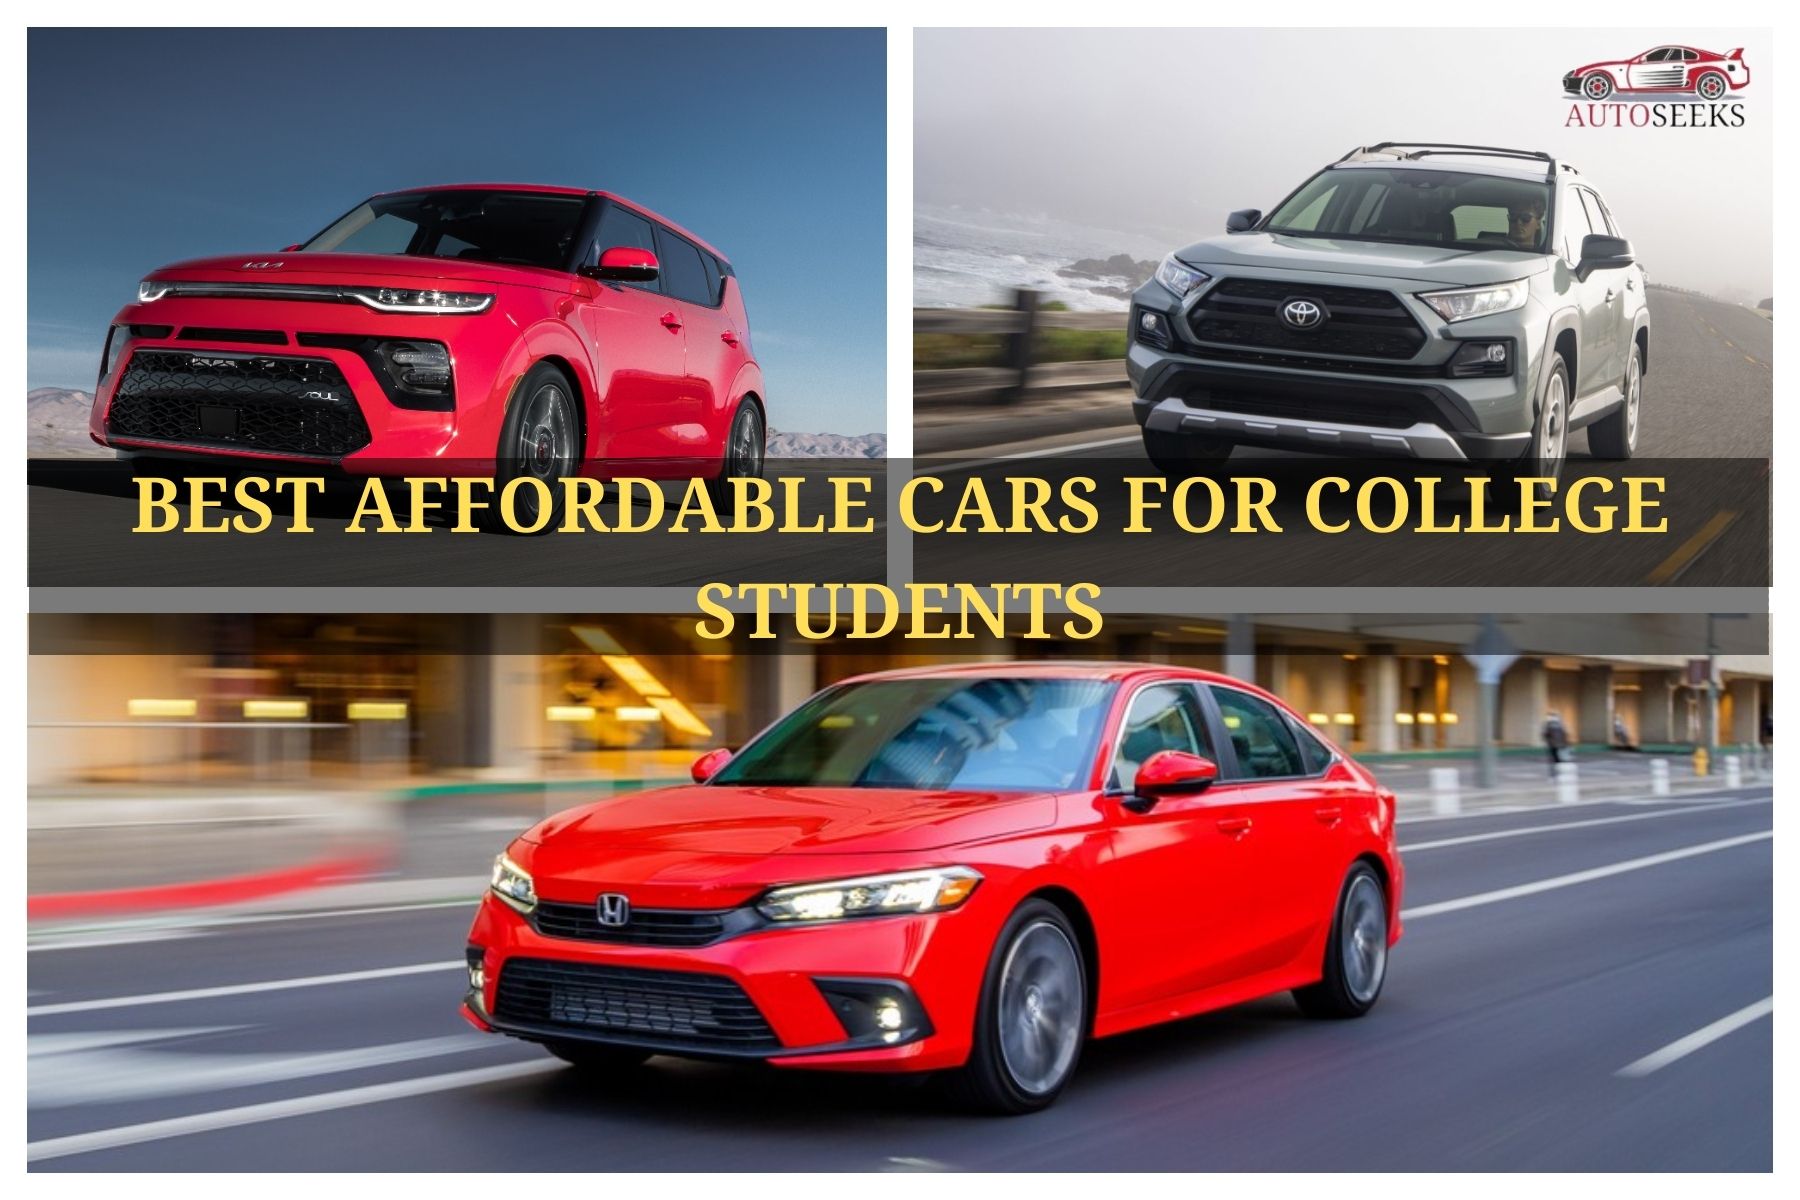 Best Affordable Cars for College Students